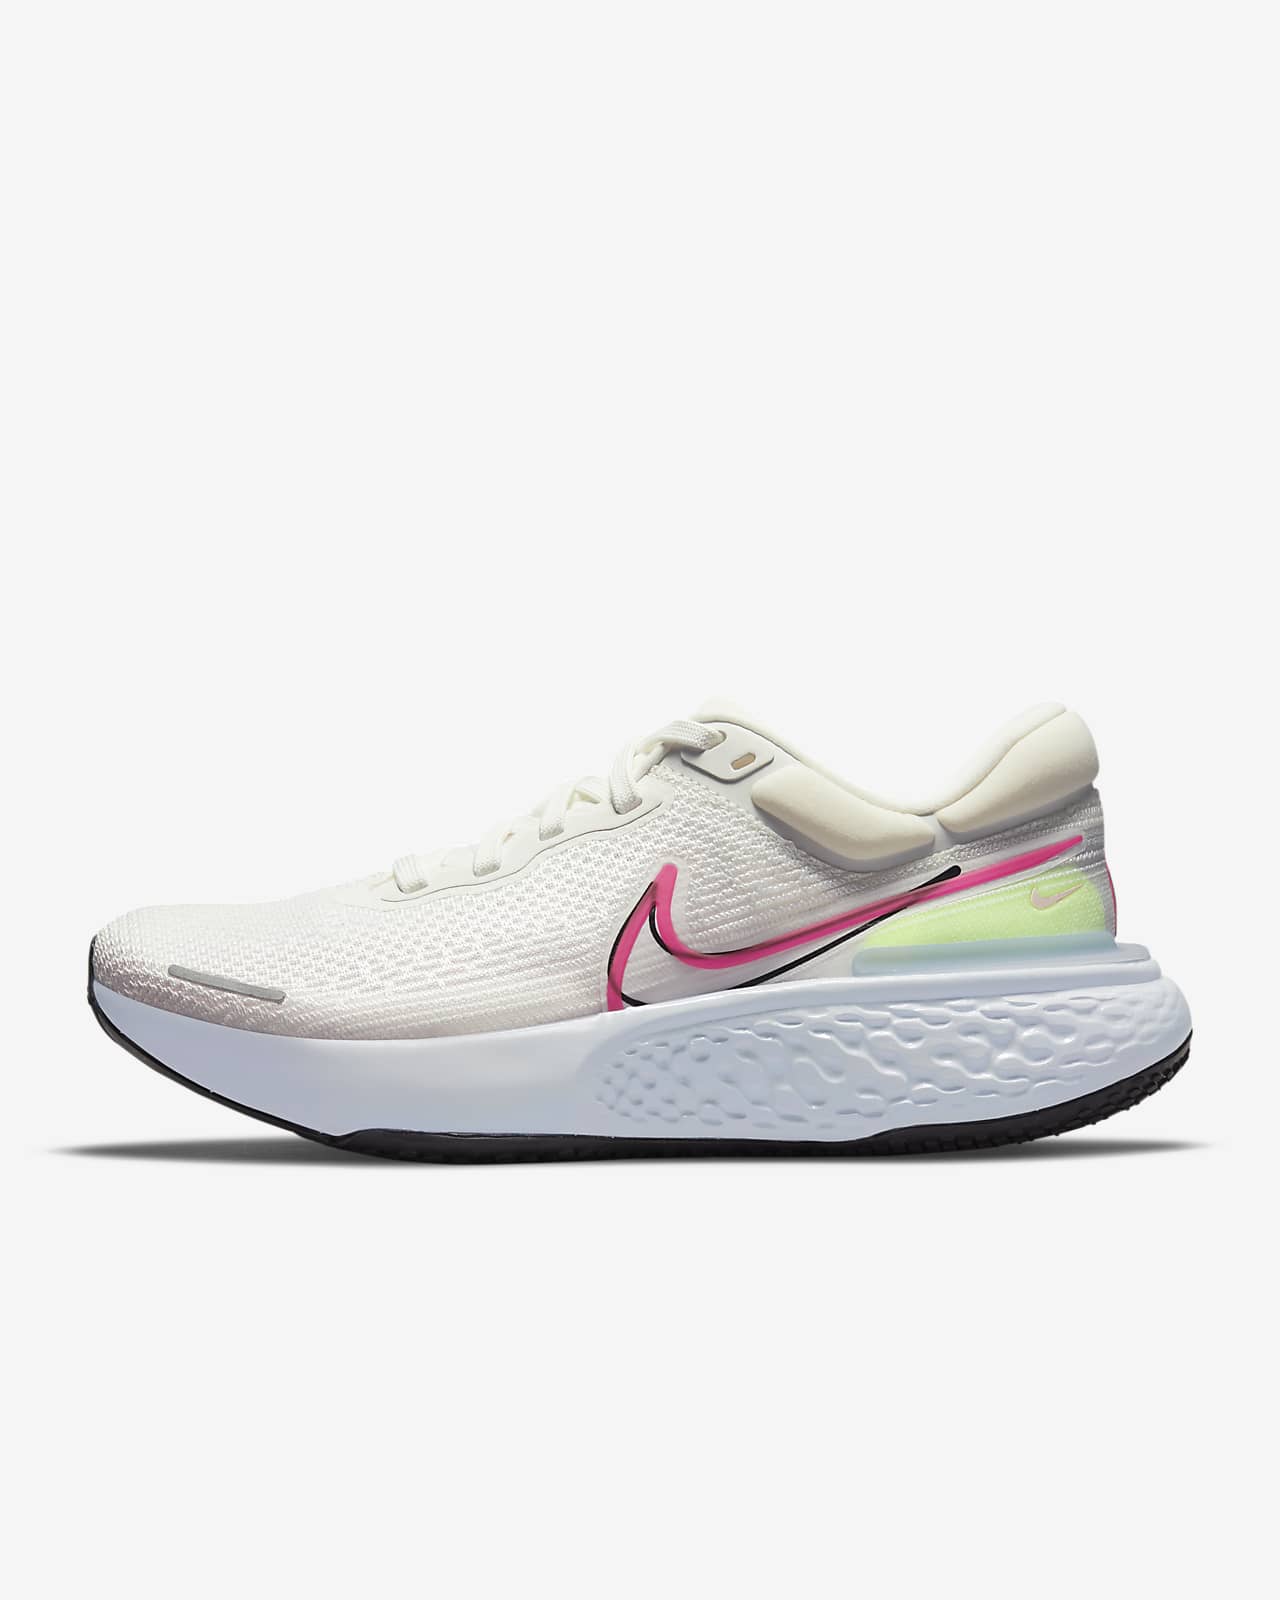 colors for fly knit at nike store